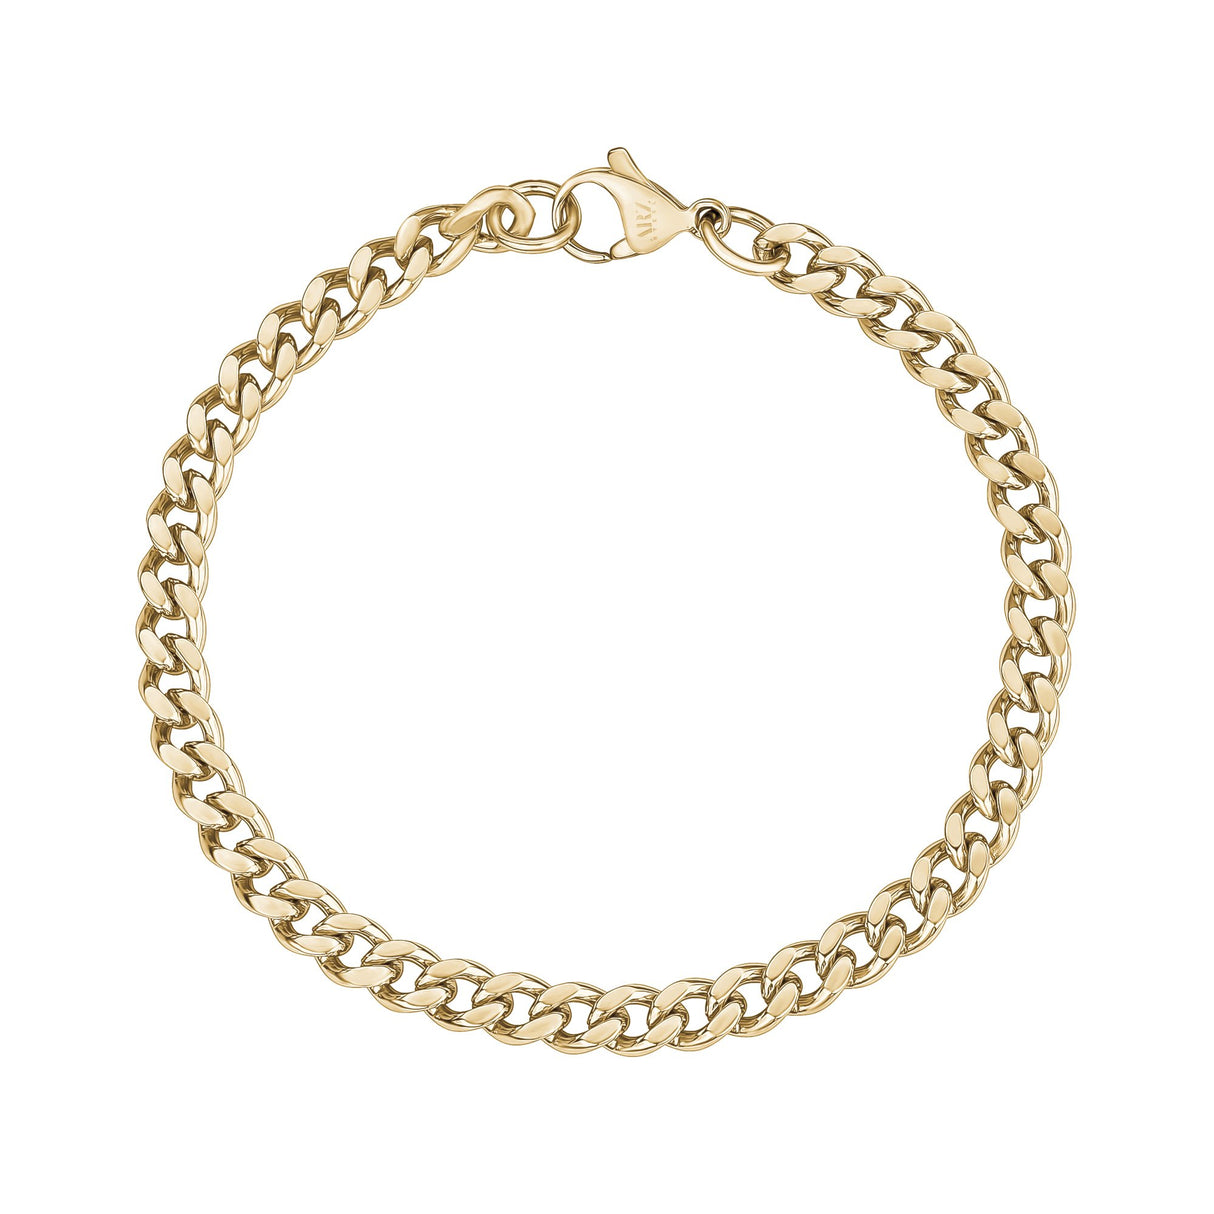 Vrouwen Armband - 5mm Goud Roestvrij Staal Cubaanse Link Dainty Armband